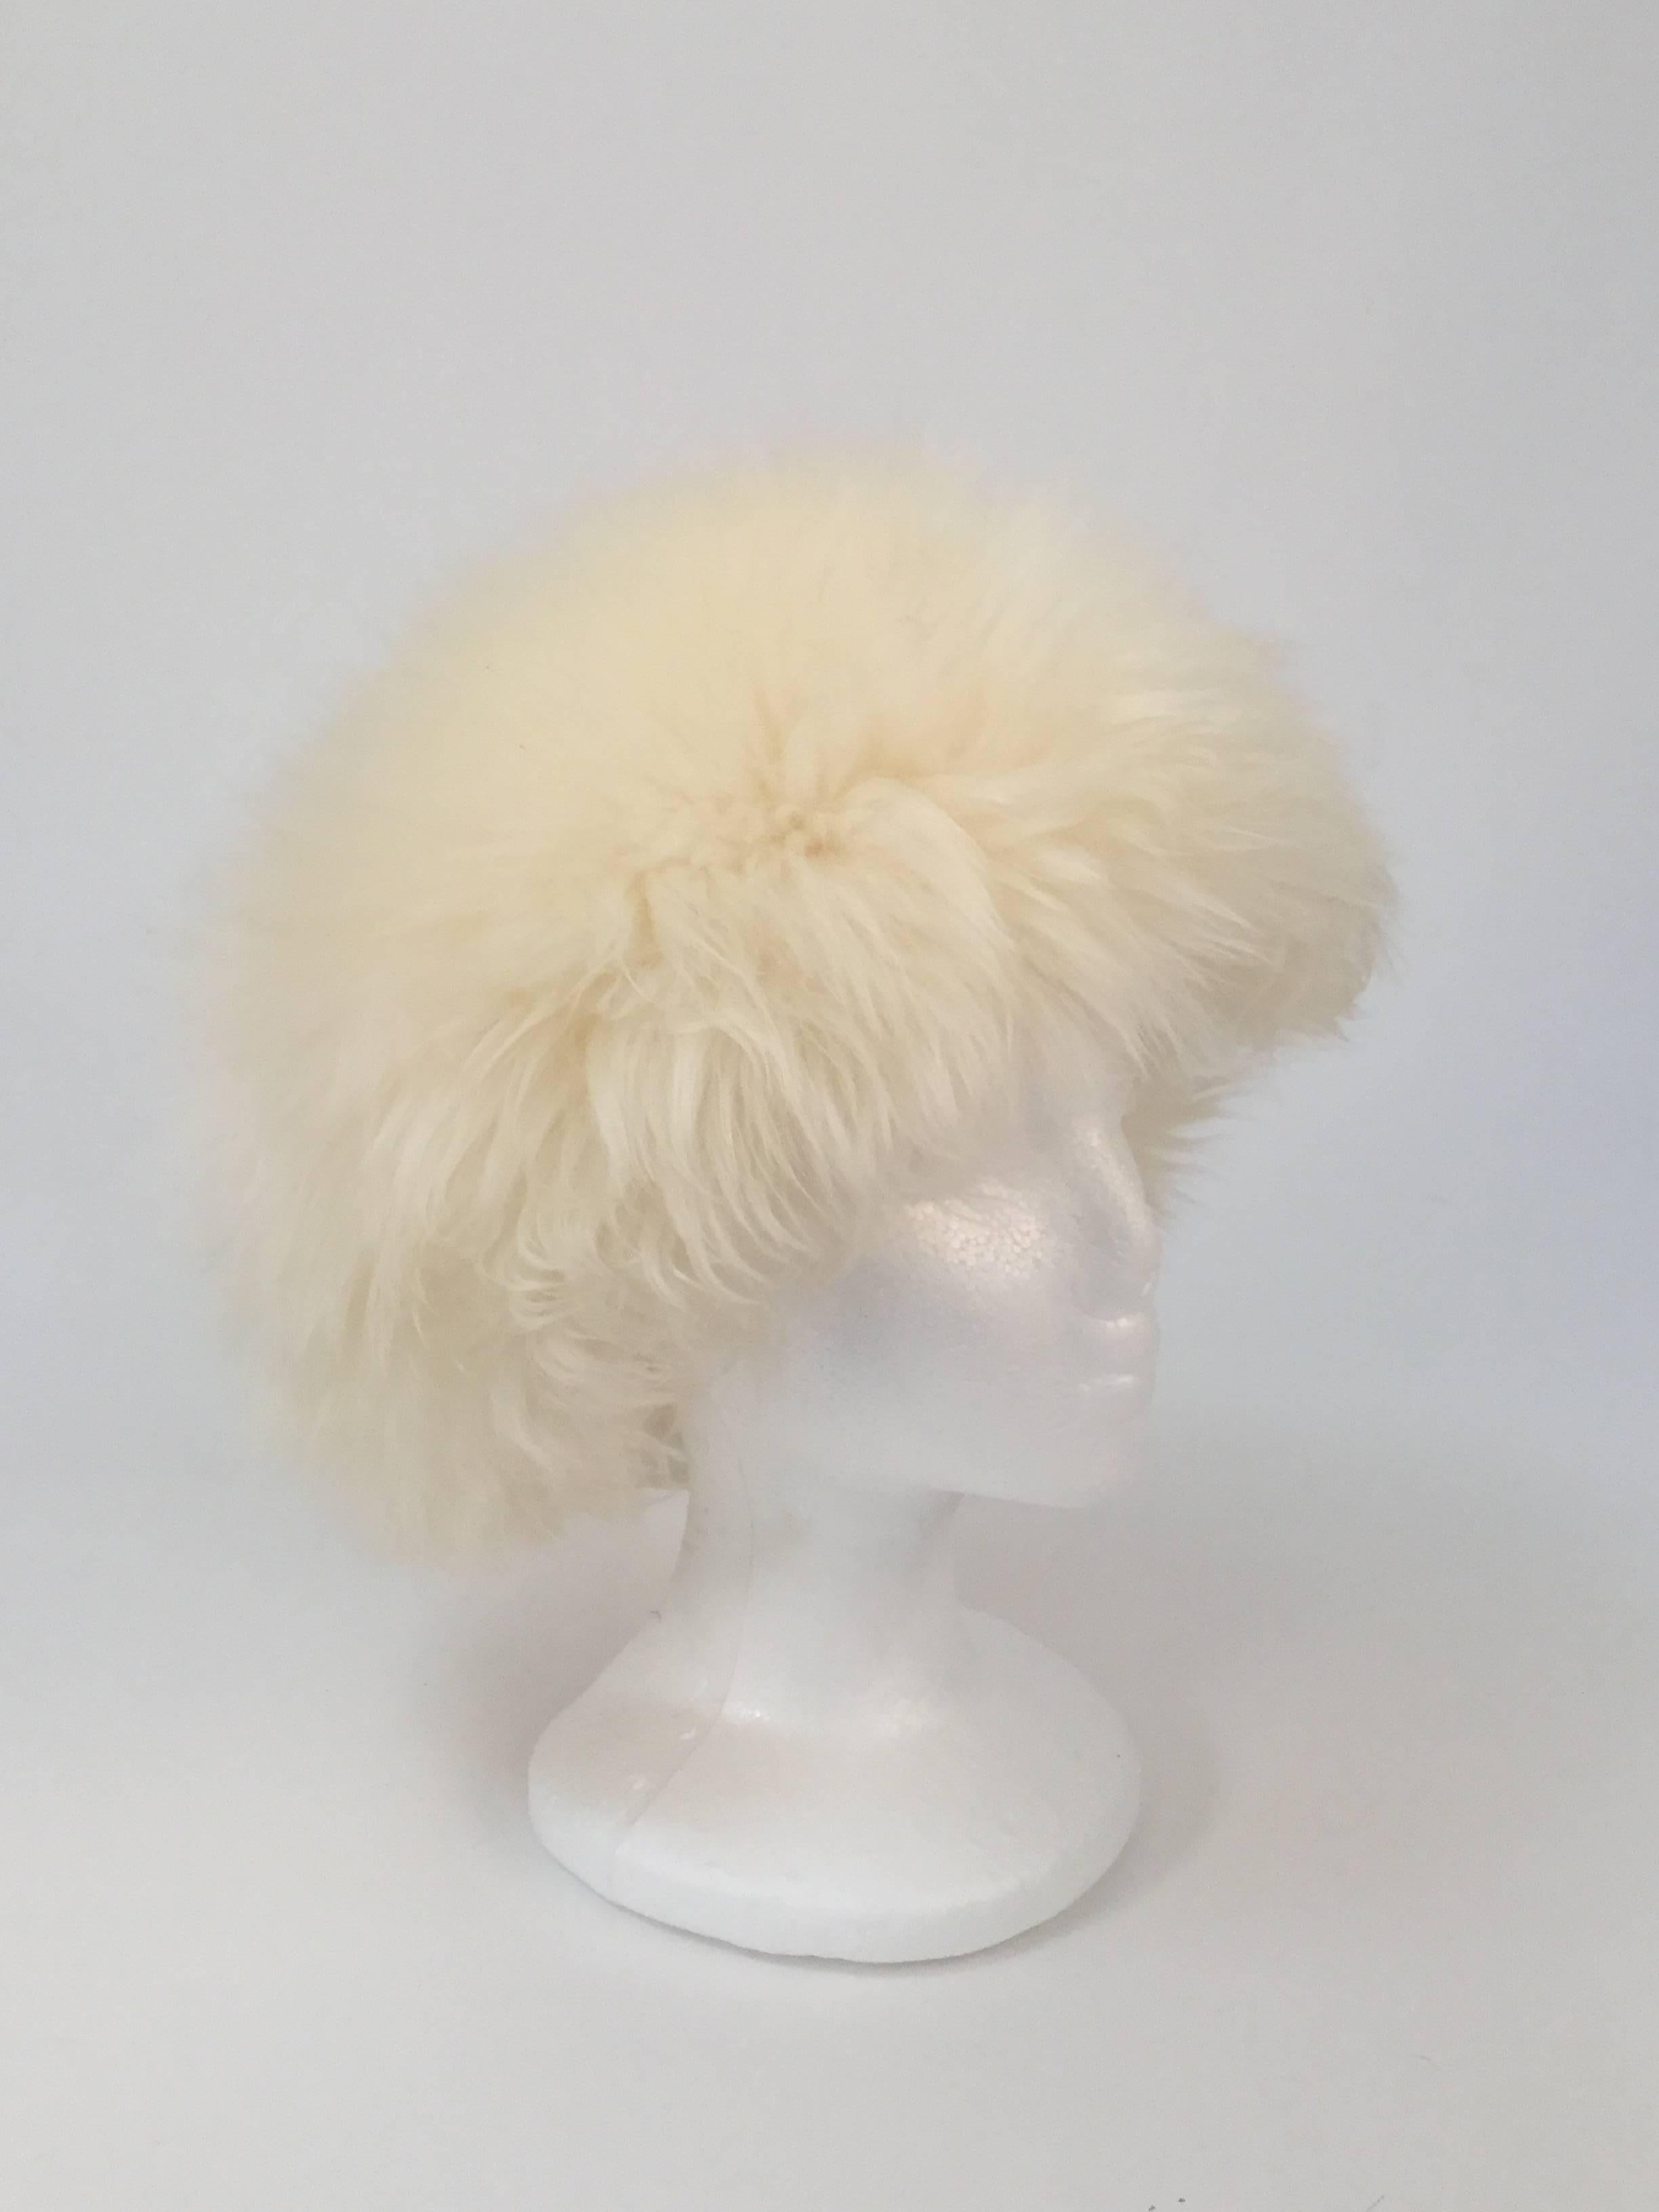 
Absolutely luxurious cream-white tuscan lamb skin fur hat! This gorgeous, plush hat is composed of genuine tuscan lamb skin fur, brushed out into a soft, wonderful, cushioned texture. The hat has a knit band, and the interior of the hat features